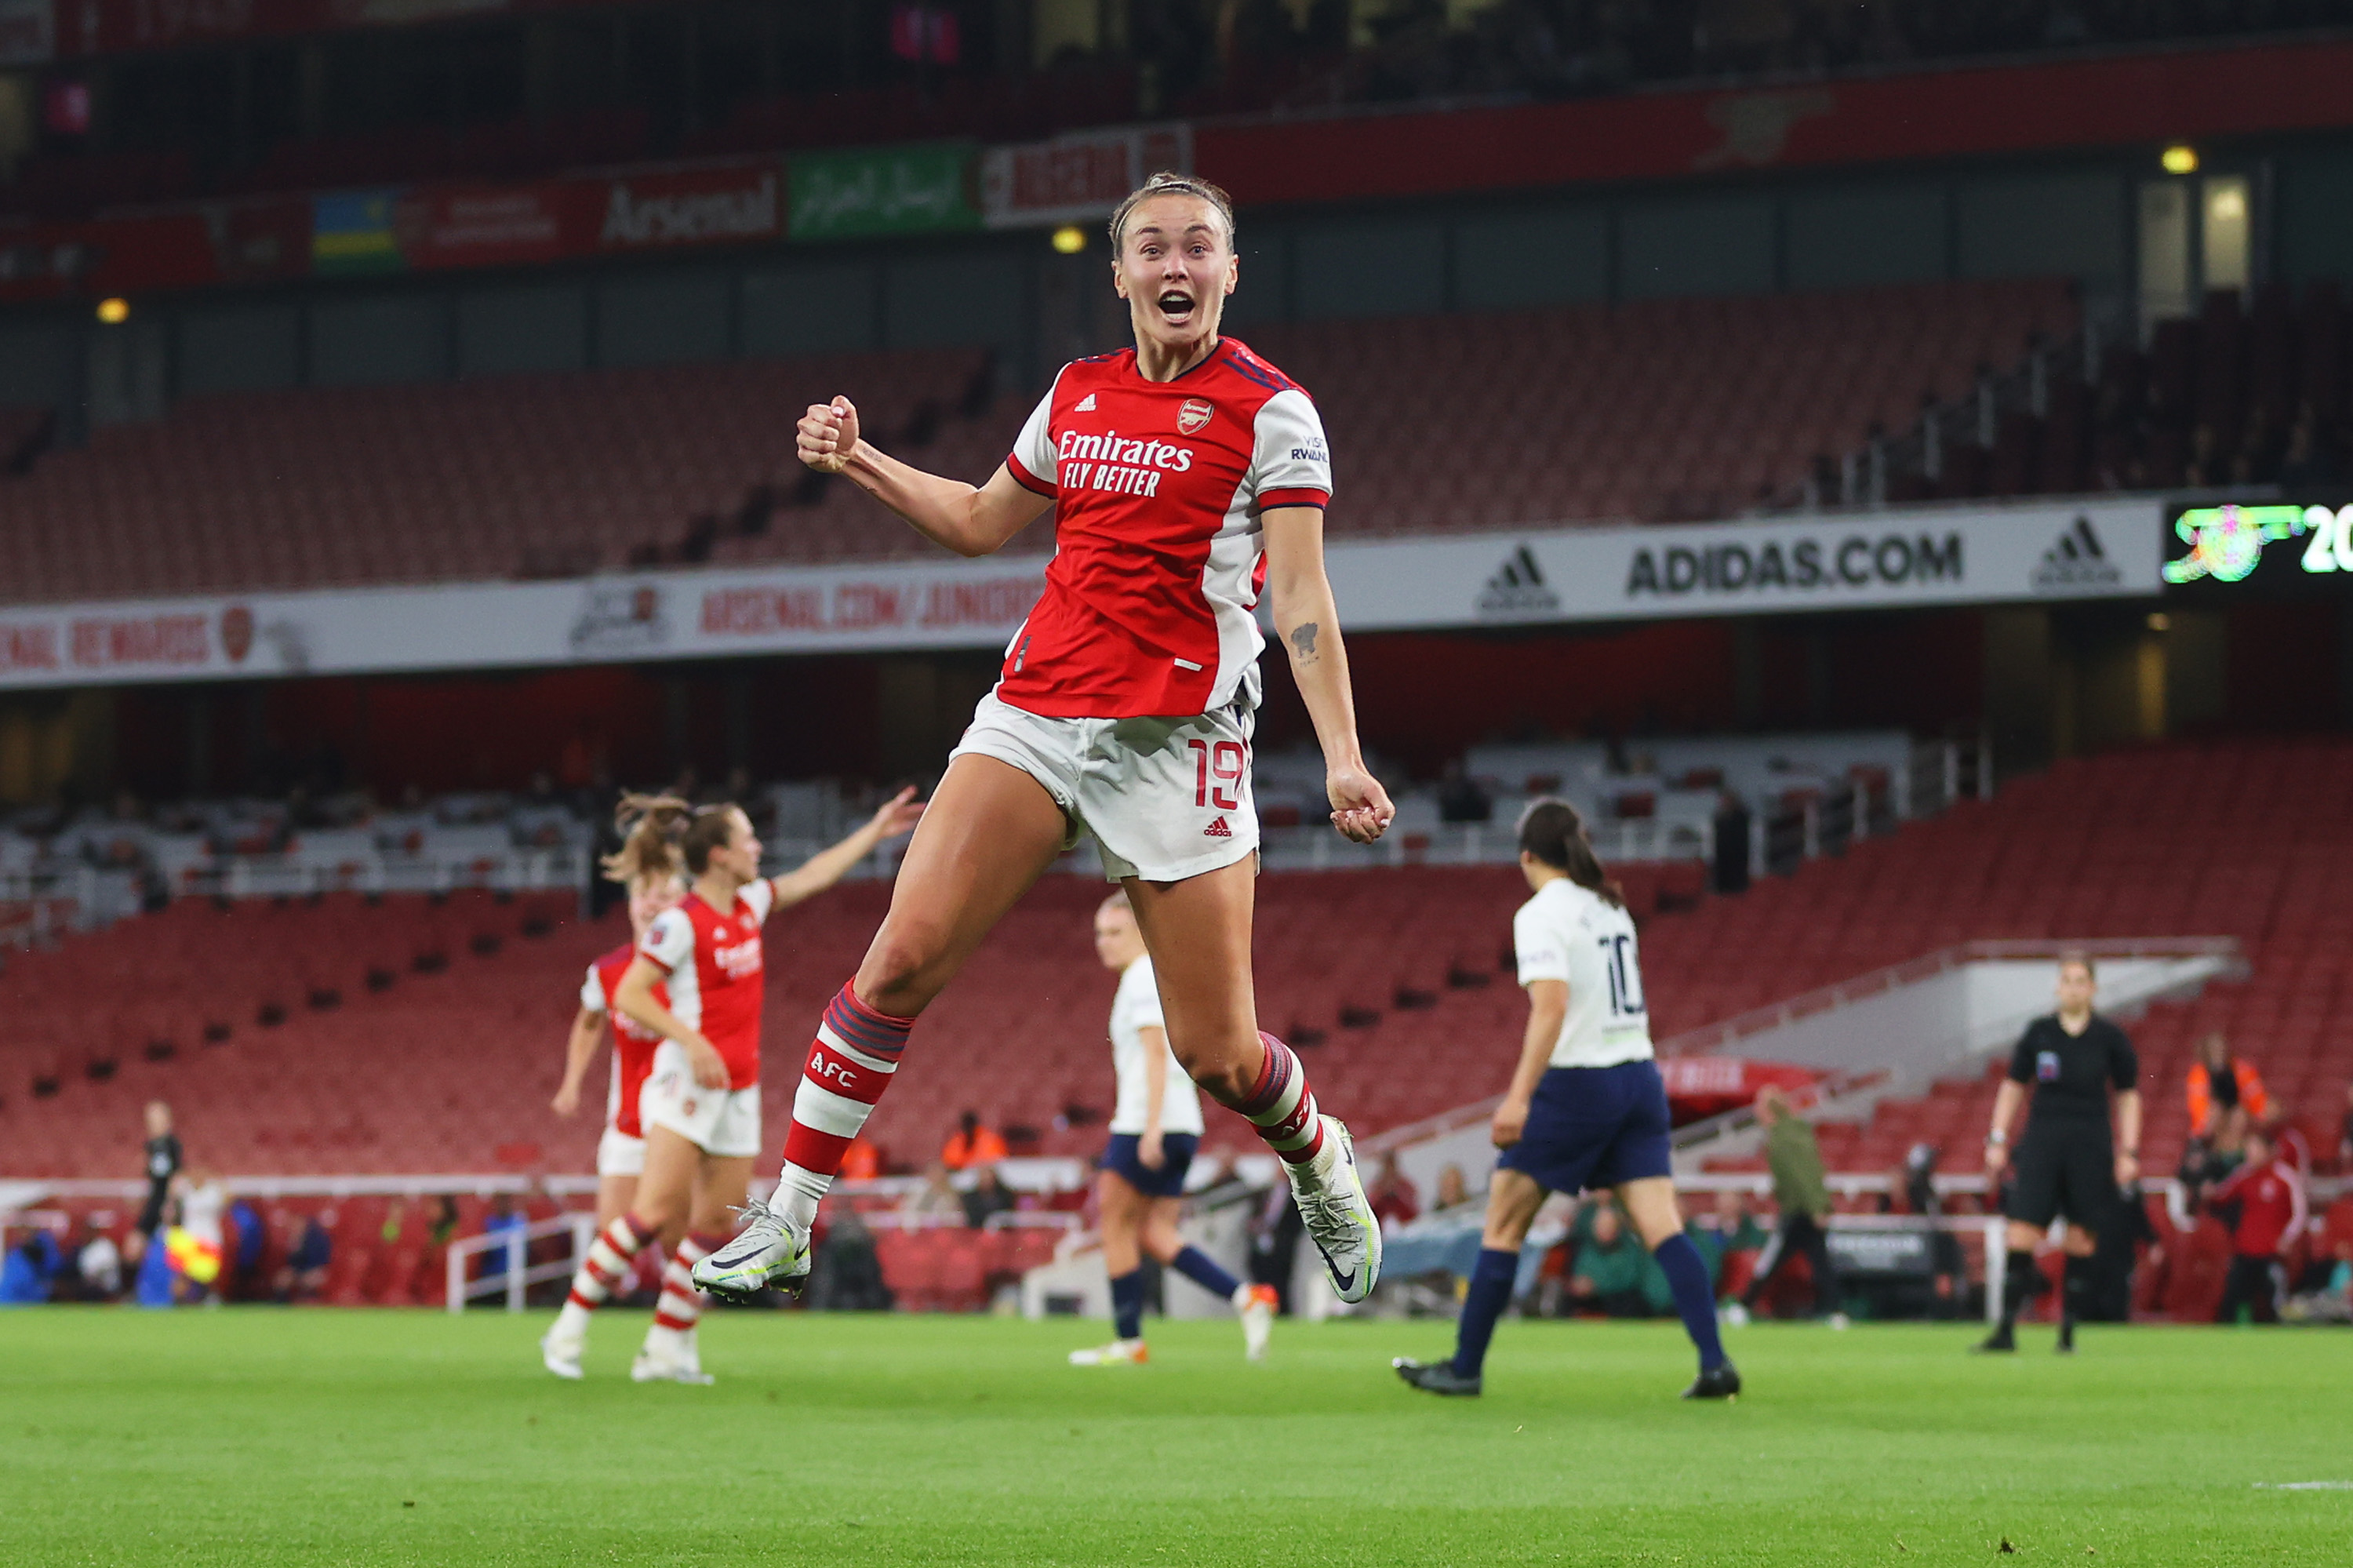 arsenal women v tottenham hotspur women barclays fa womens super league 6 | “It’s something for the future” Romano responds to Arsenal’s link to La Liga youngster | The Paradise